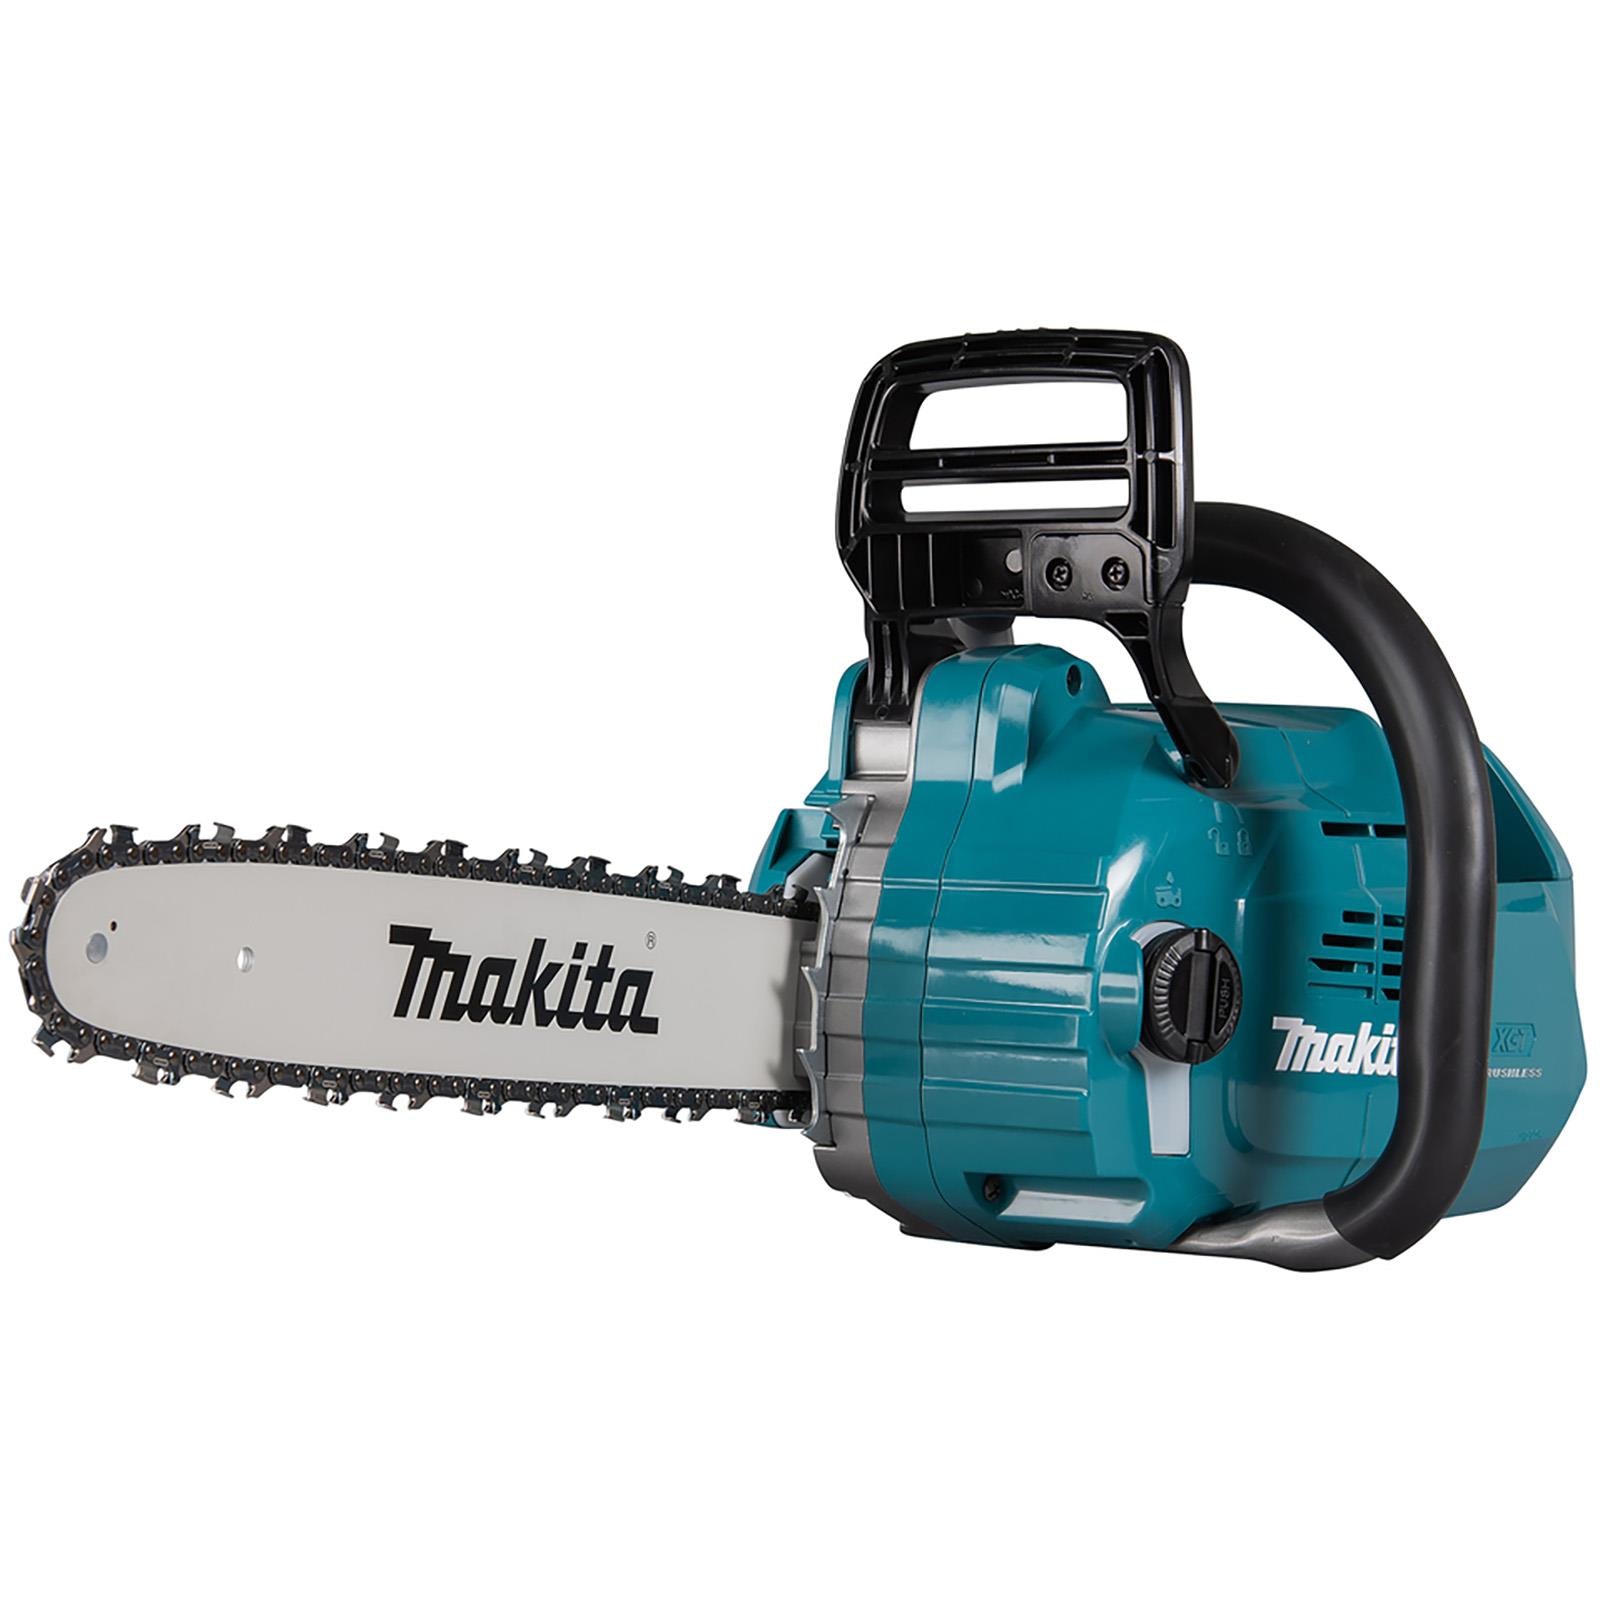 Makita Chainsaw Heavy Duty 35cm 14" 40V XGT Brushless Cordless Garden Tree Cutting Pruning Bare Unit Body Only UC011GZ